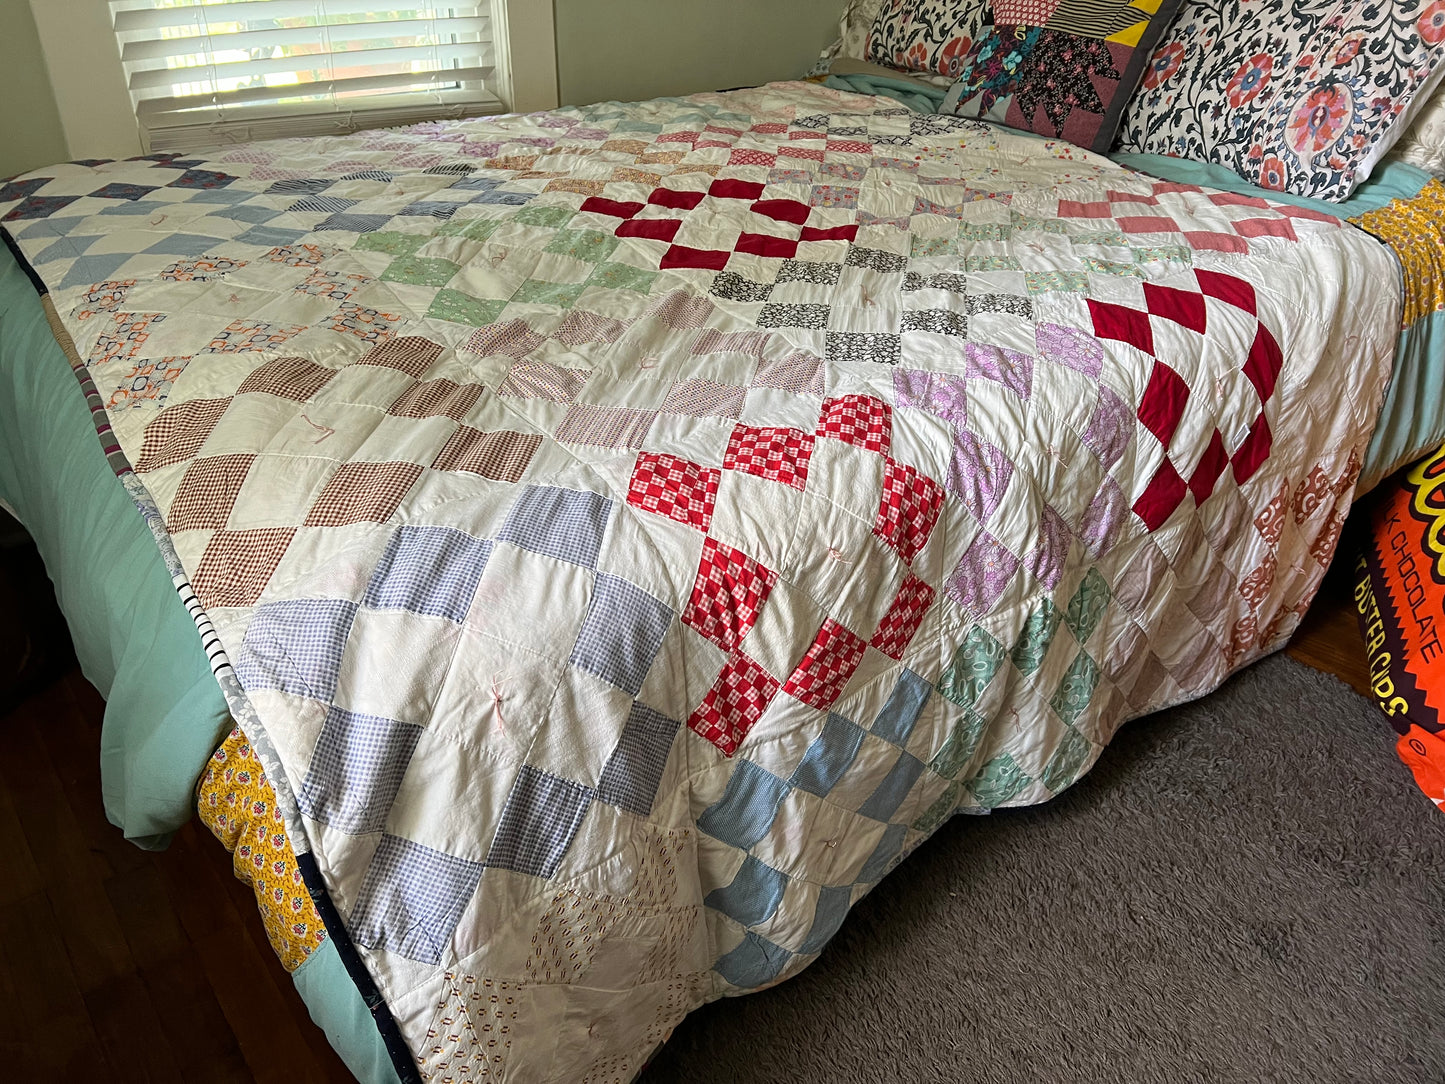 Vintage Quilt on top of a queen sized bed, it hangs down over the sides, and is very lovely